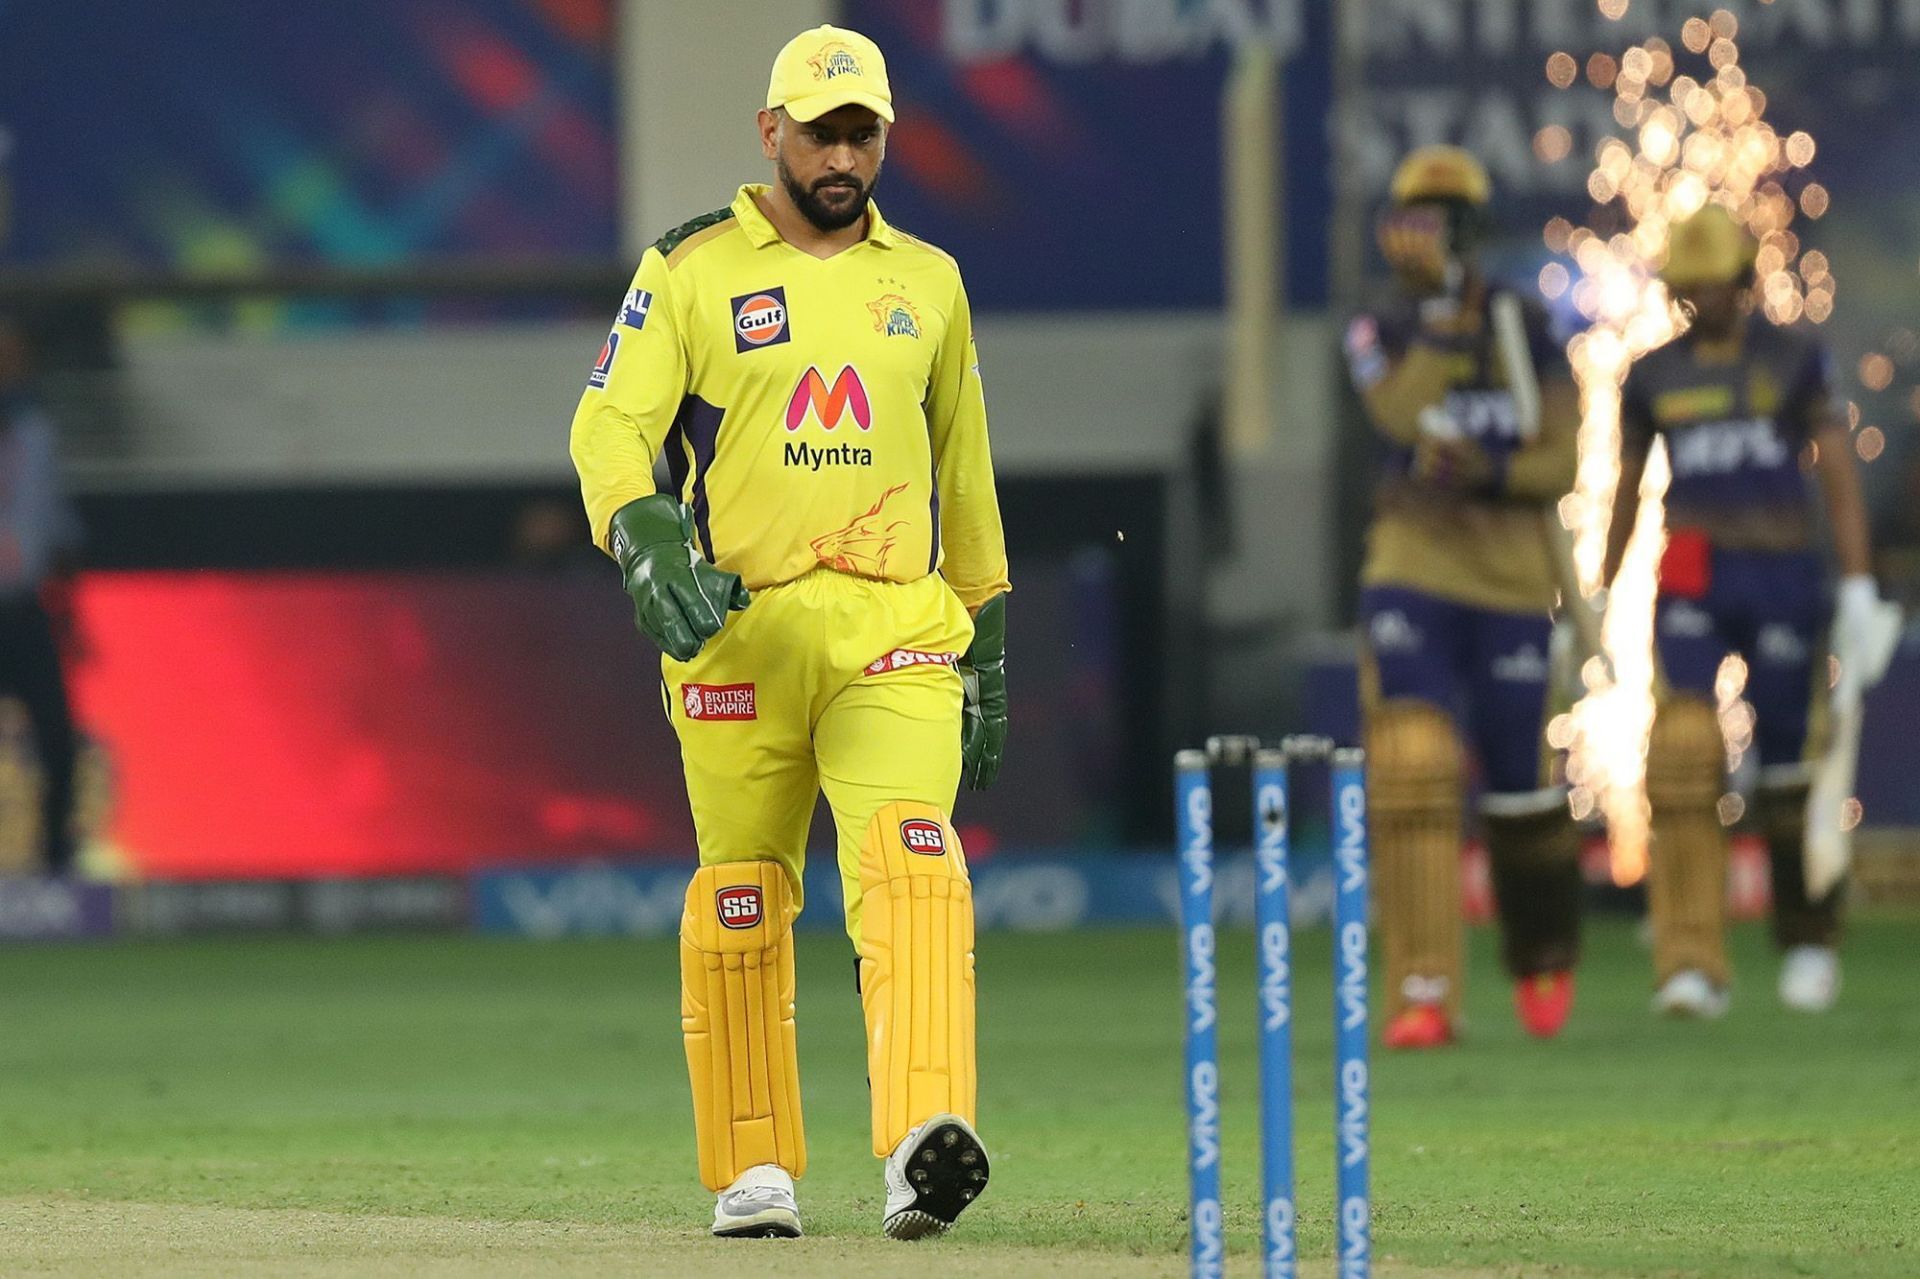 MS Dhoni will play in IPL 2022 for CSK, but not as captain